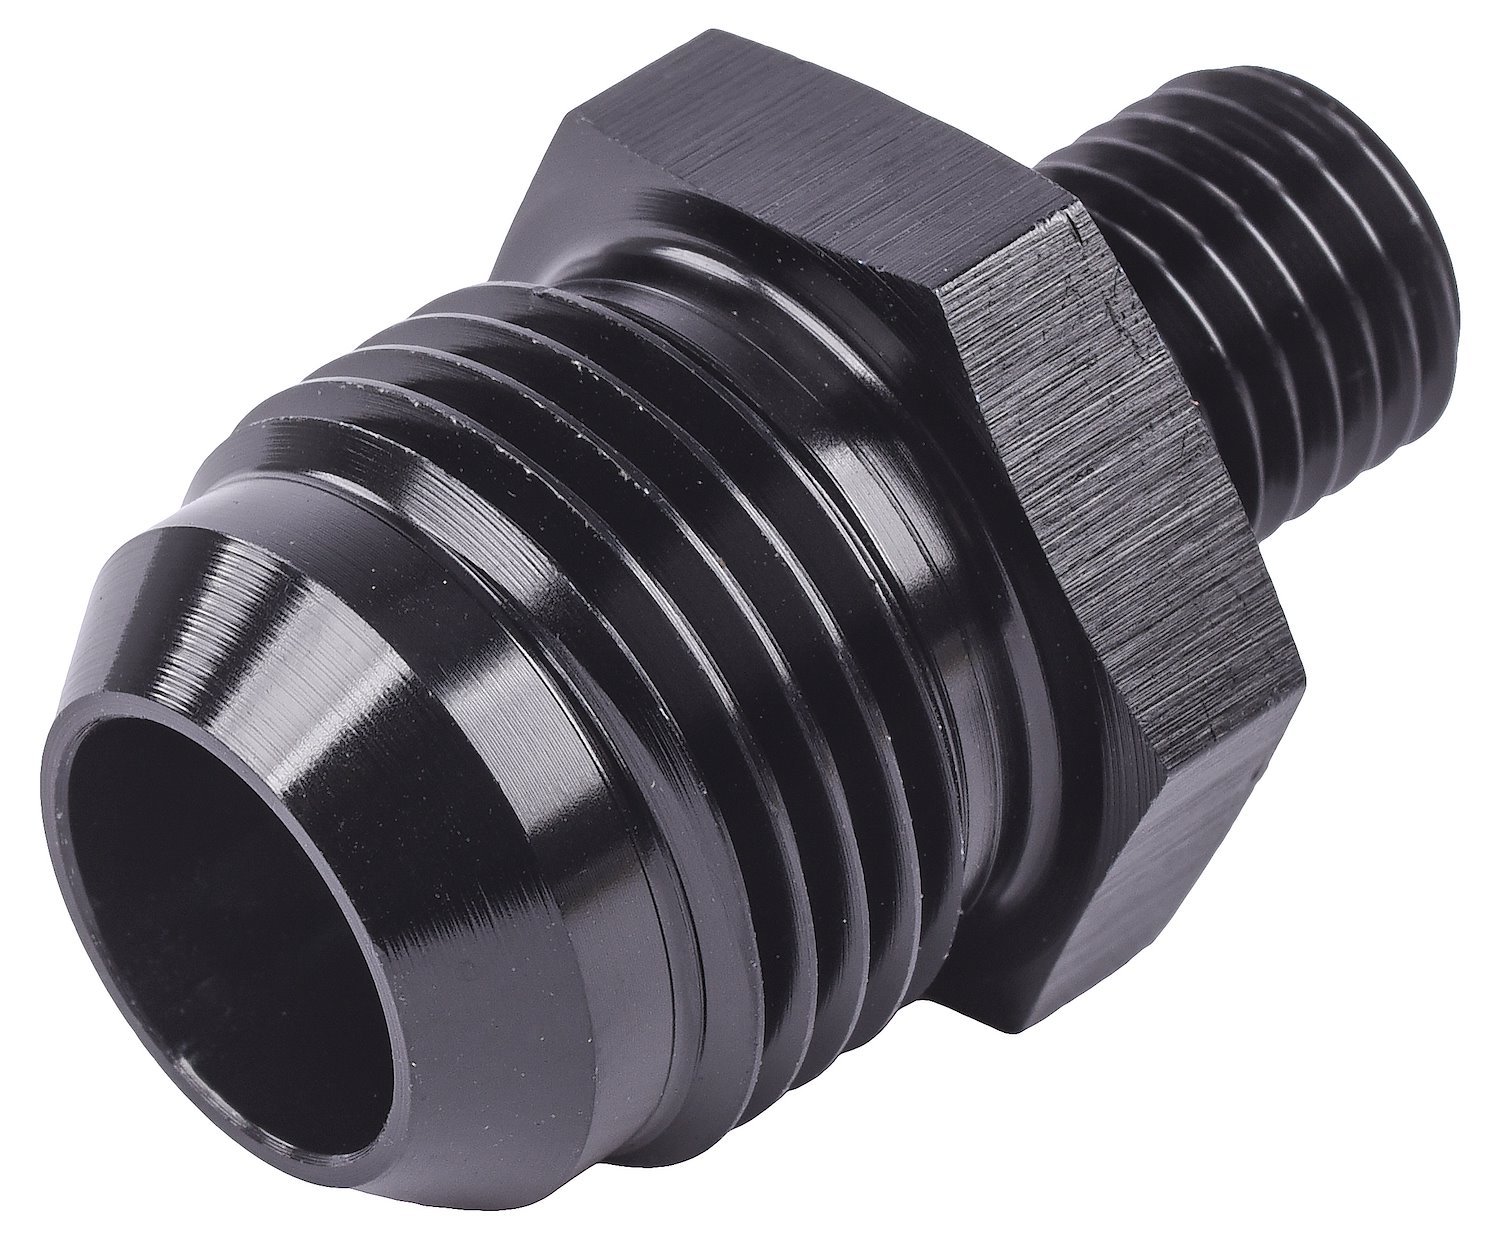 AN to Metric Adapter Fitting [-10 AN Male to 12mm x 1.5 Male]